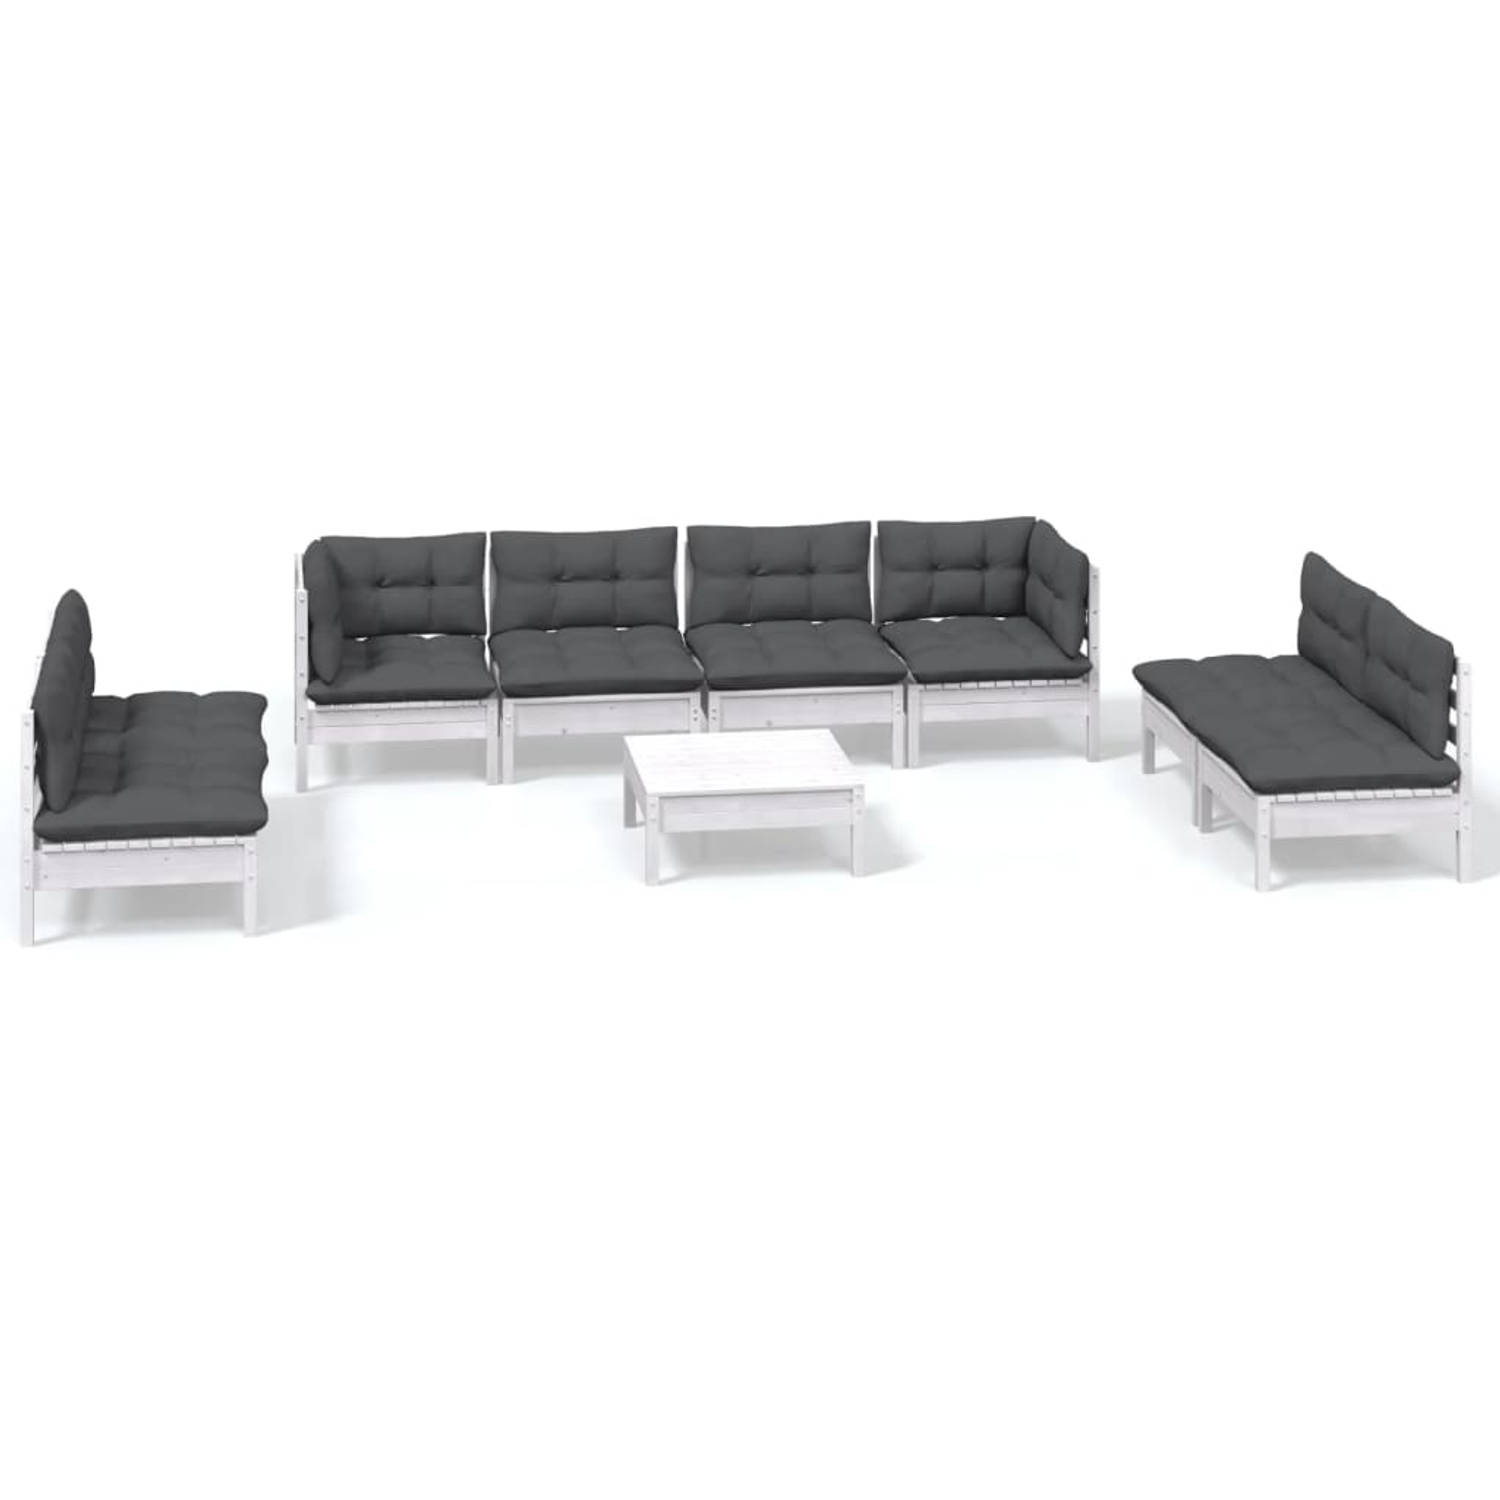 The Living Store Loungeset Grenenhout Antraciet 63.5x63.5x62.5 - Modulair